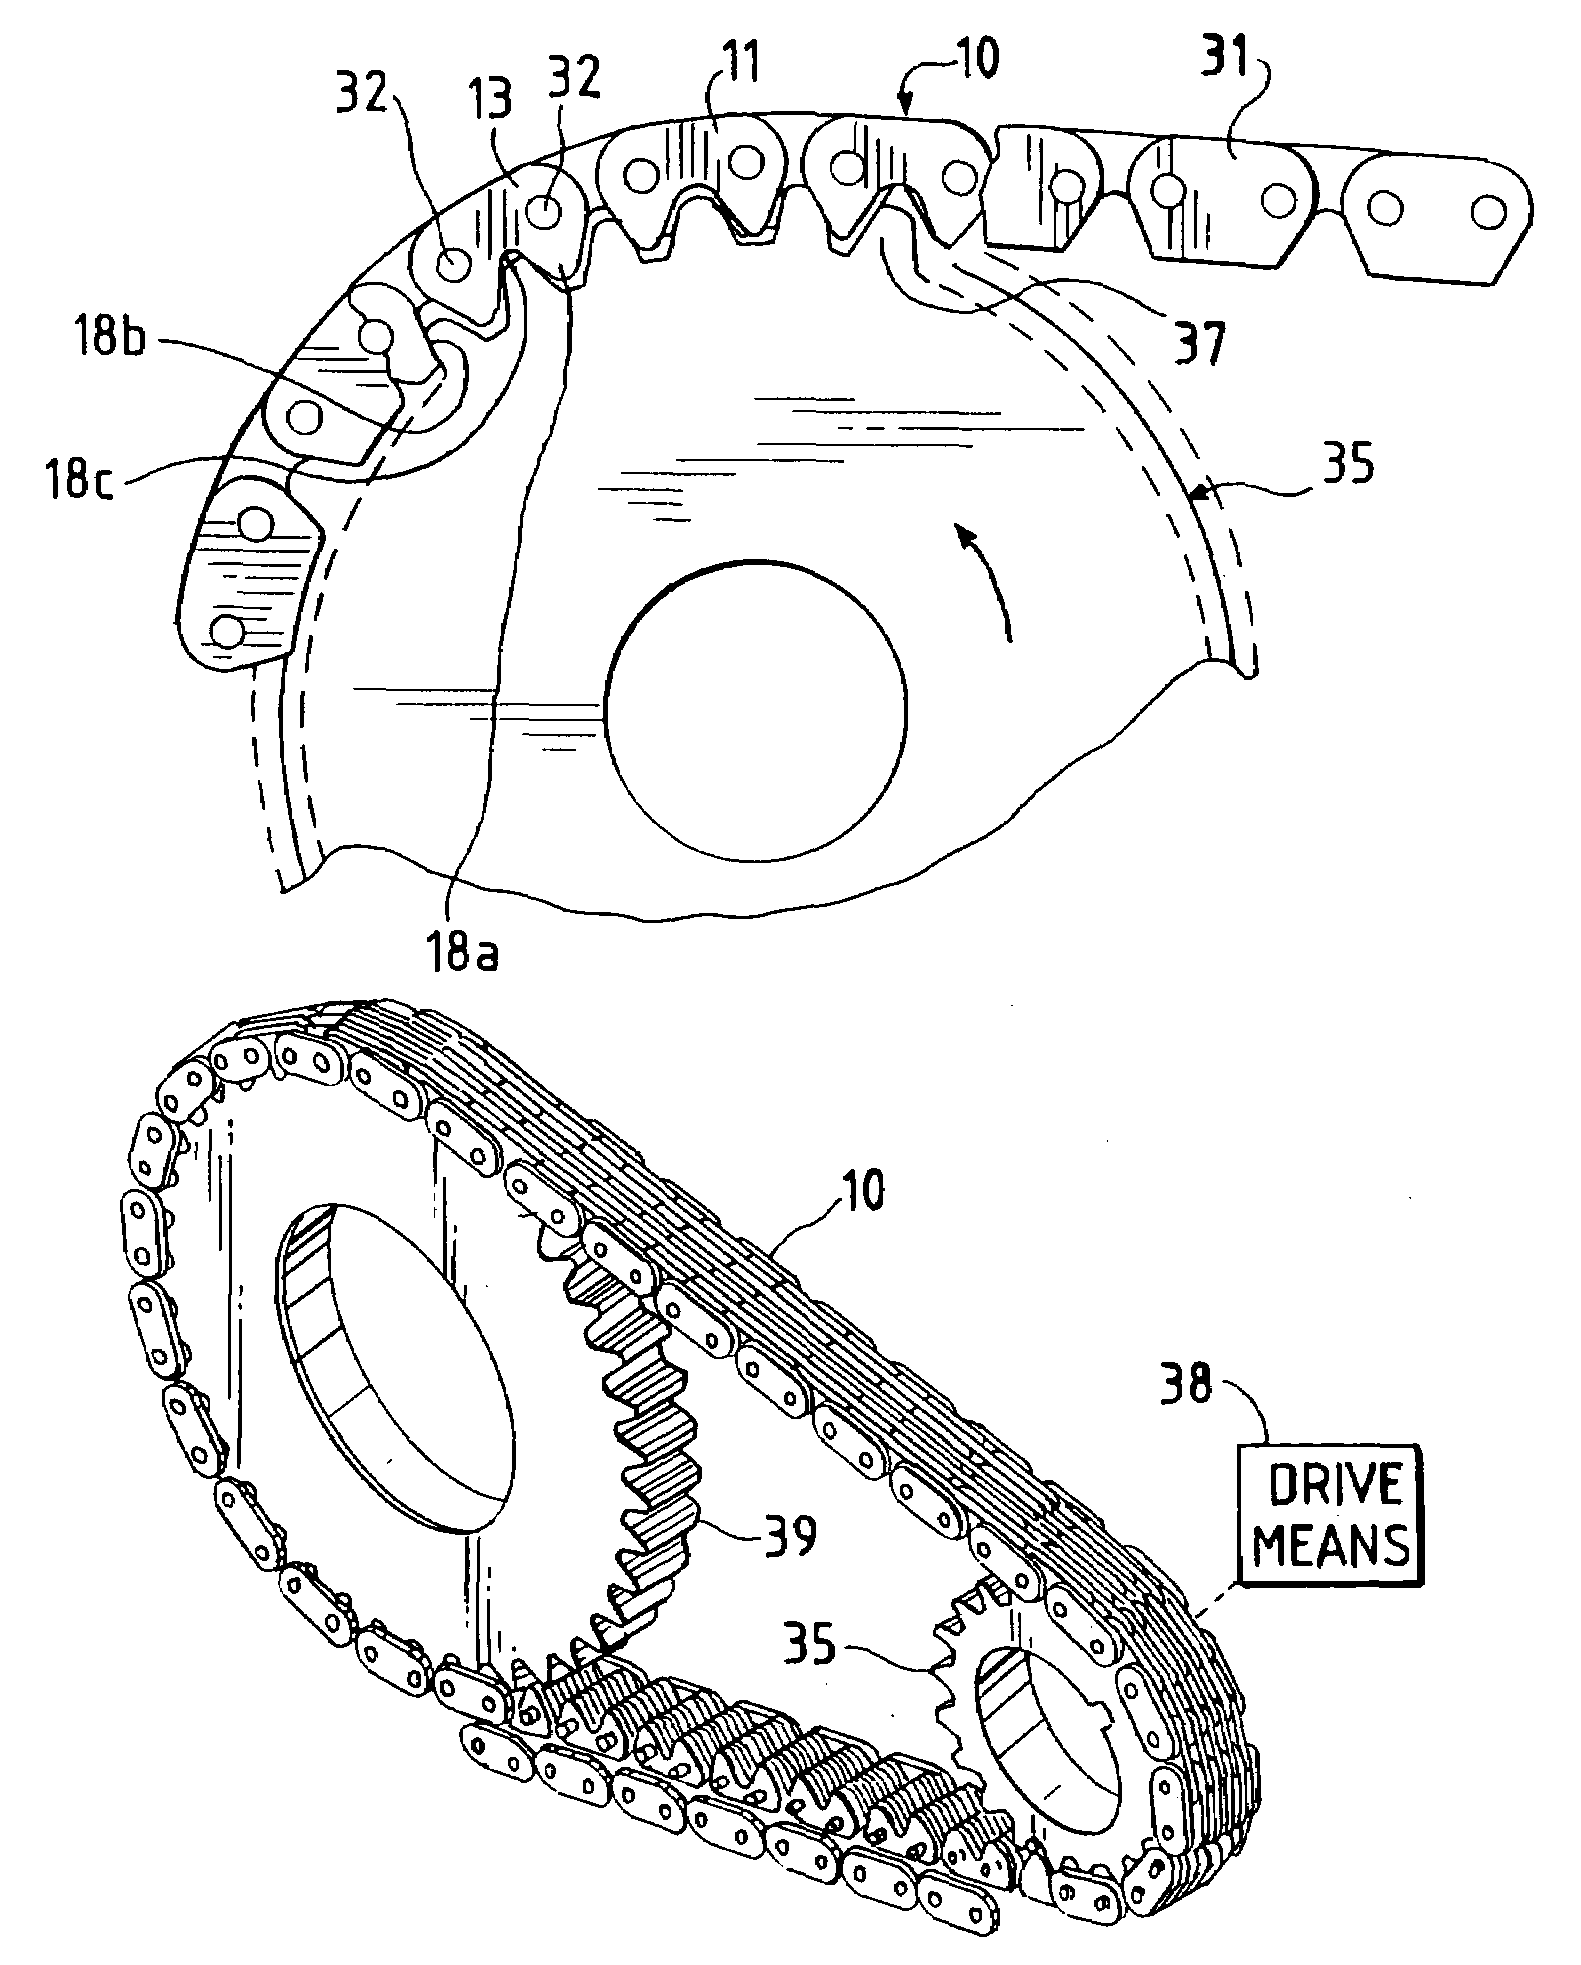 Power transmission chain with ceramic joint components